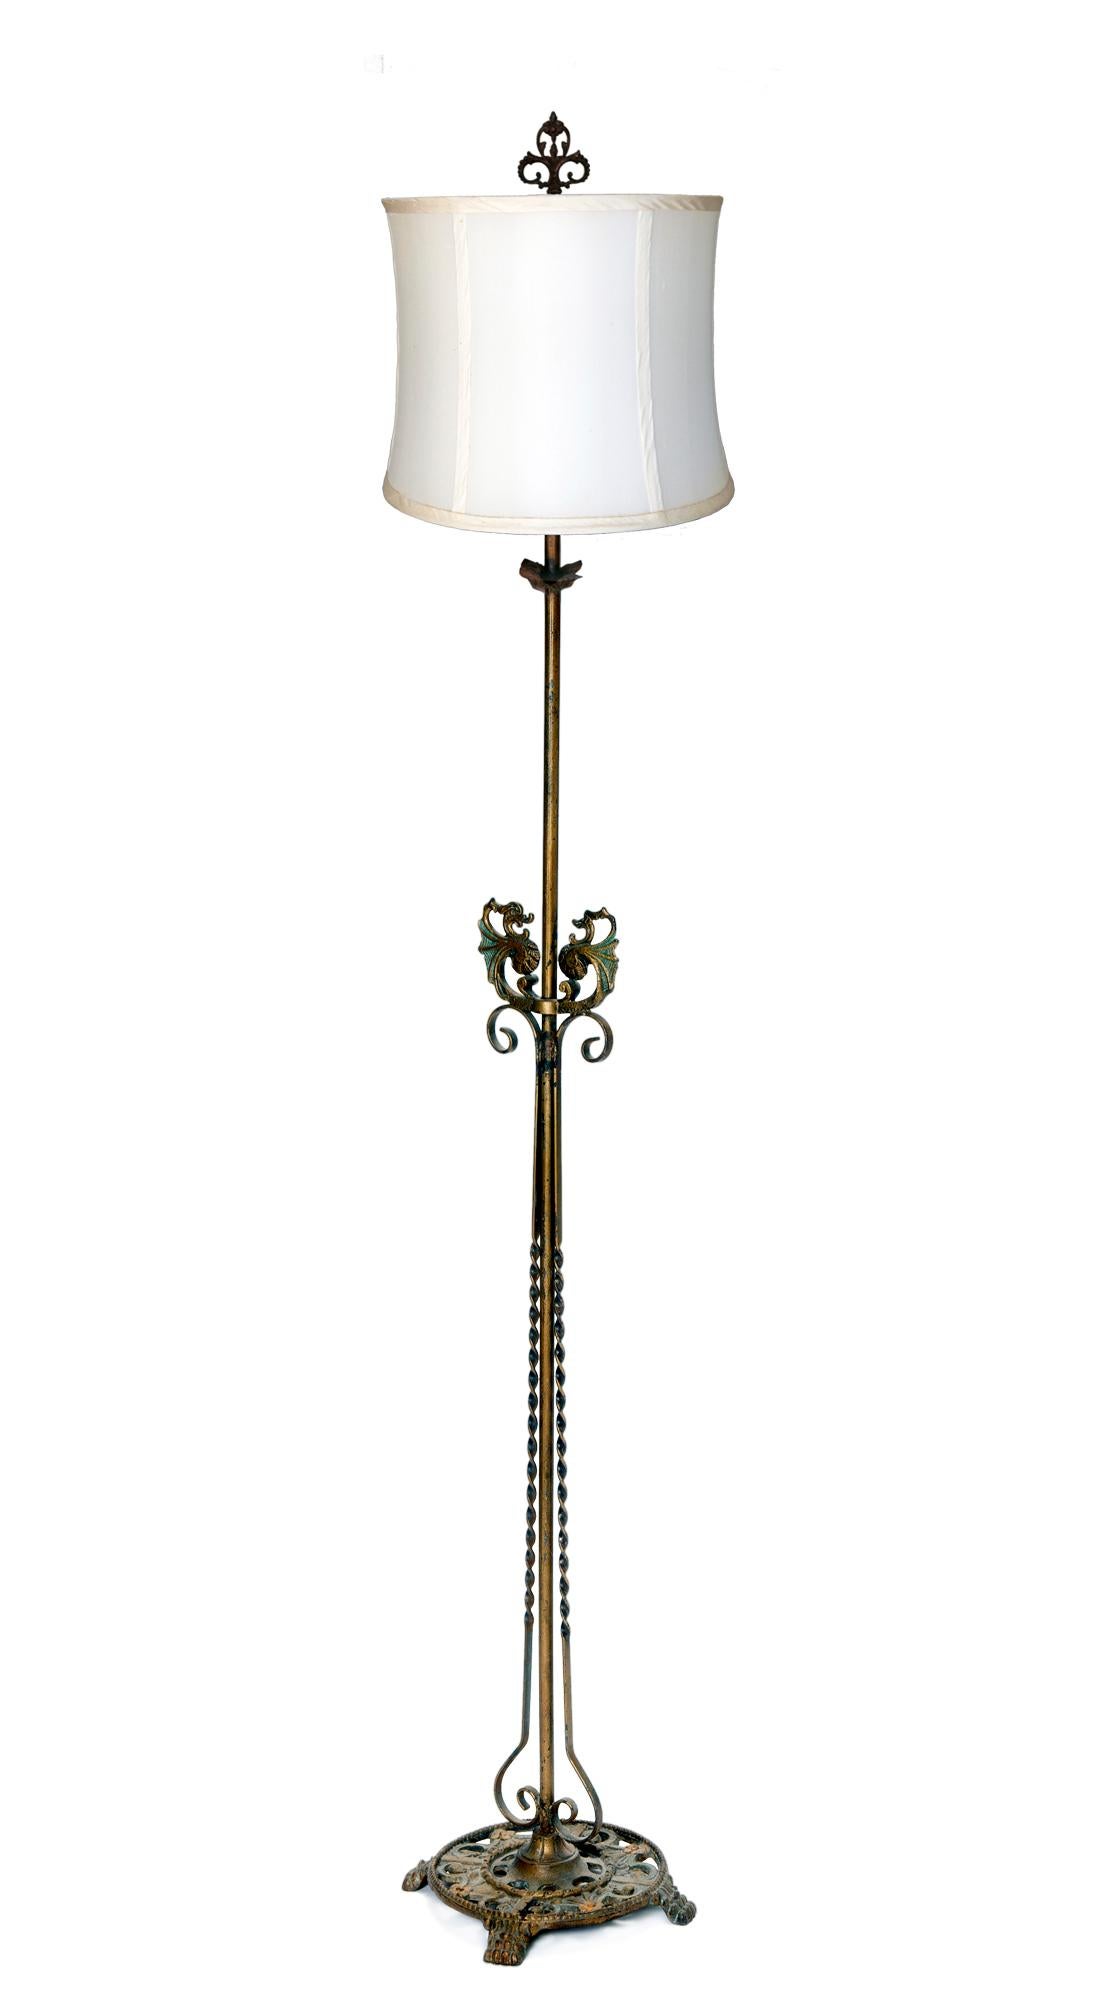 Classic 1920’s wrought iron Deco floor lamp. All original surfaces. Re-wired, brass sockets, standard US bulbs recommended. Lamp has pull chain for two directional sockets. Period silk shade.